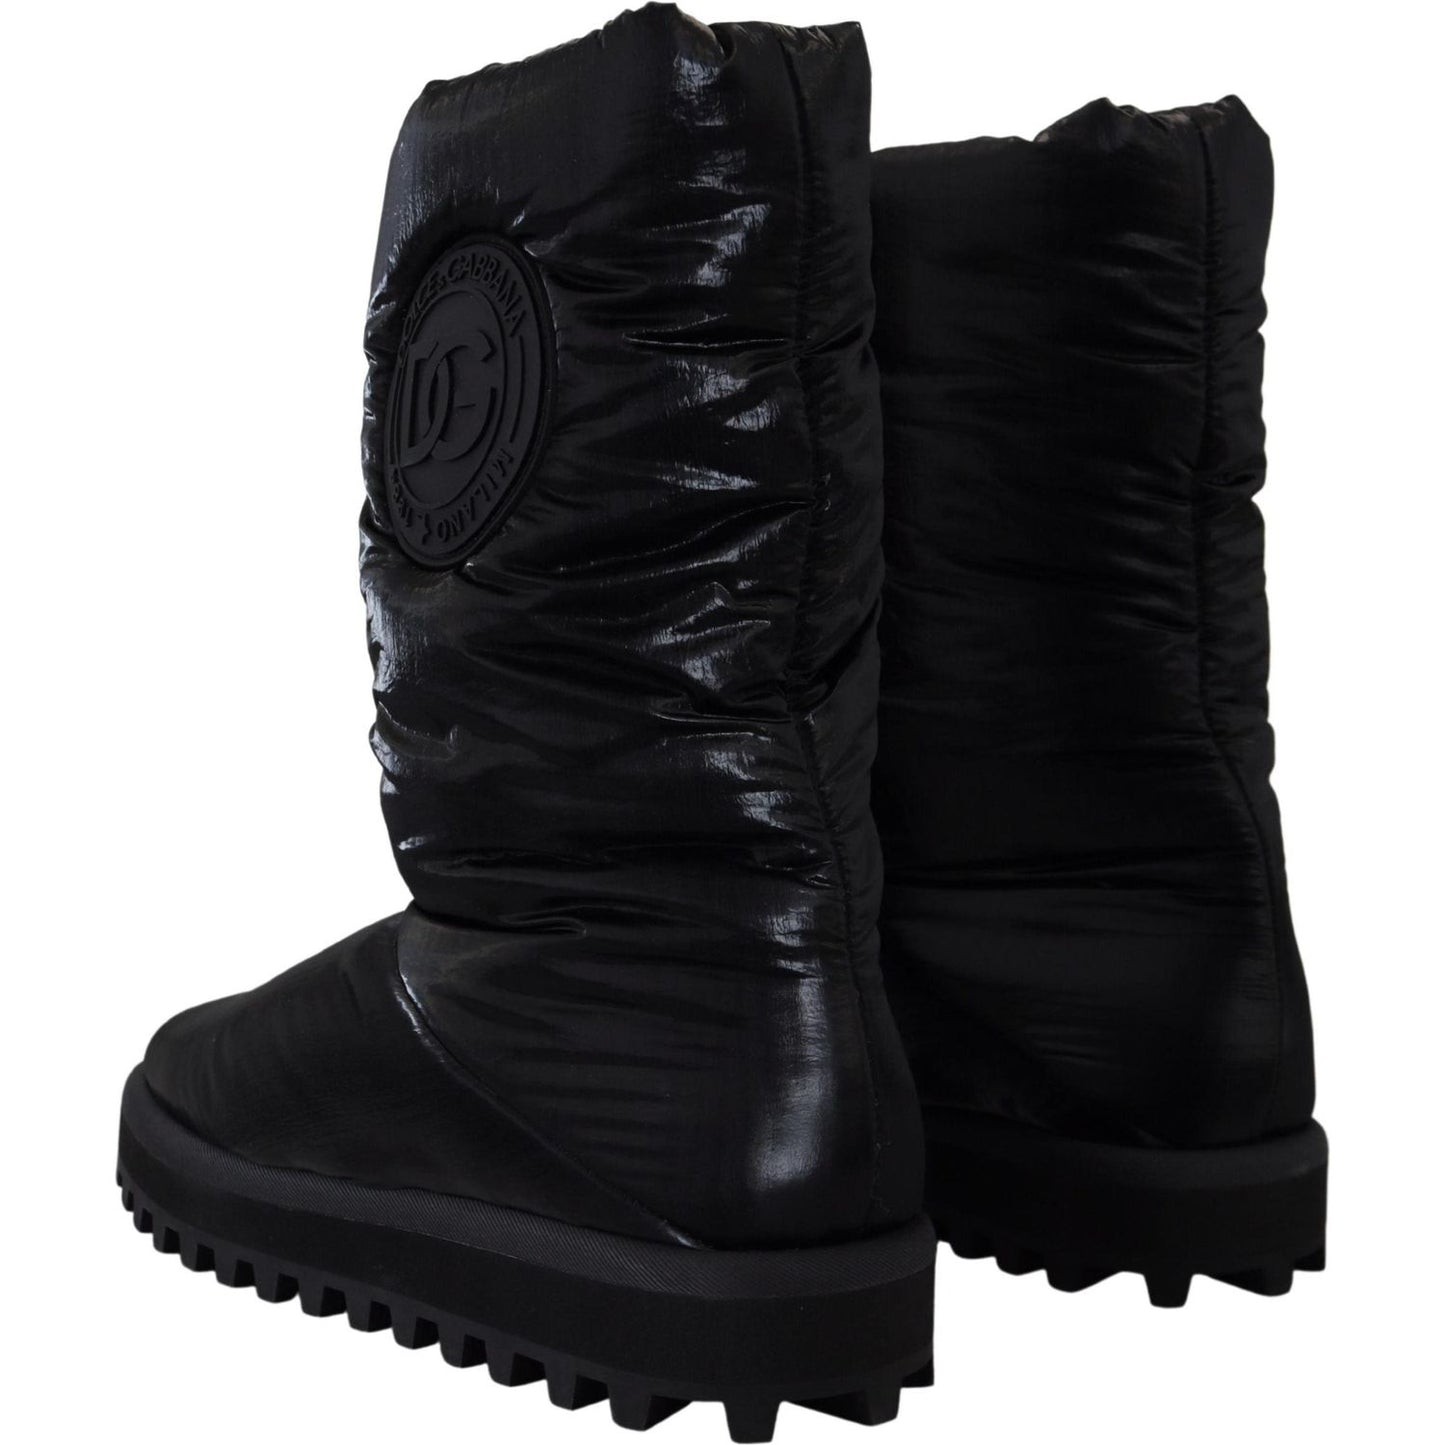 Dolce & Gabbana Elegant Mid-Calf Boots in Black Polyester black-boots-padded-mid-calf-winter-shoes